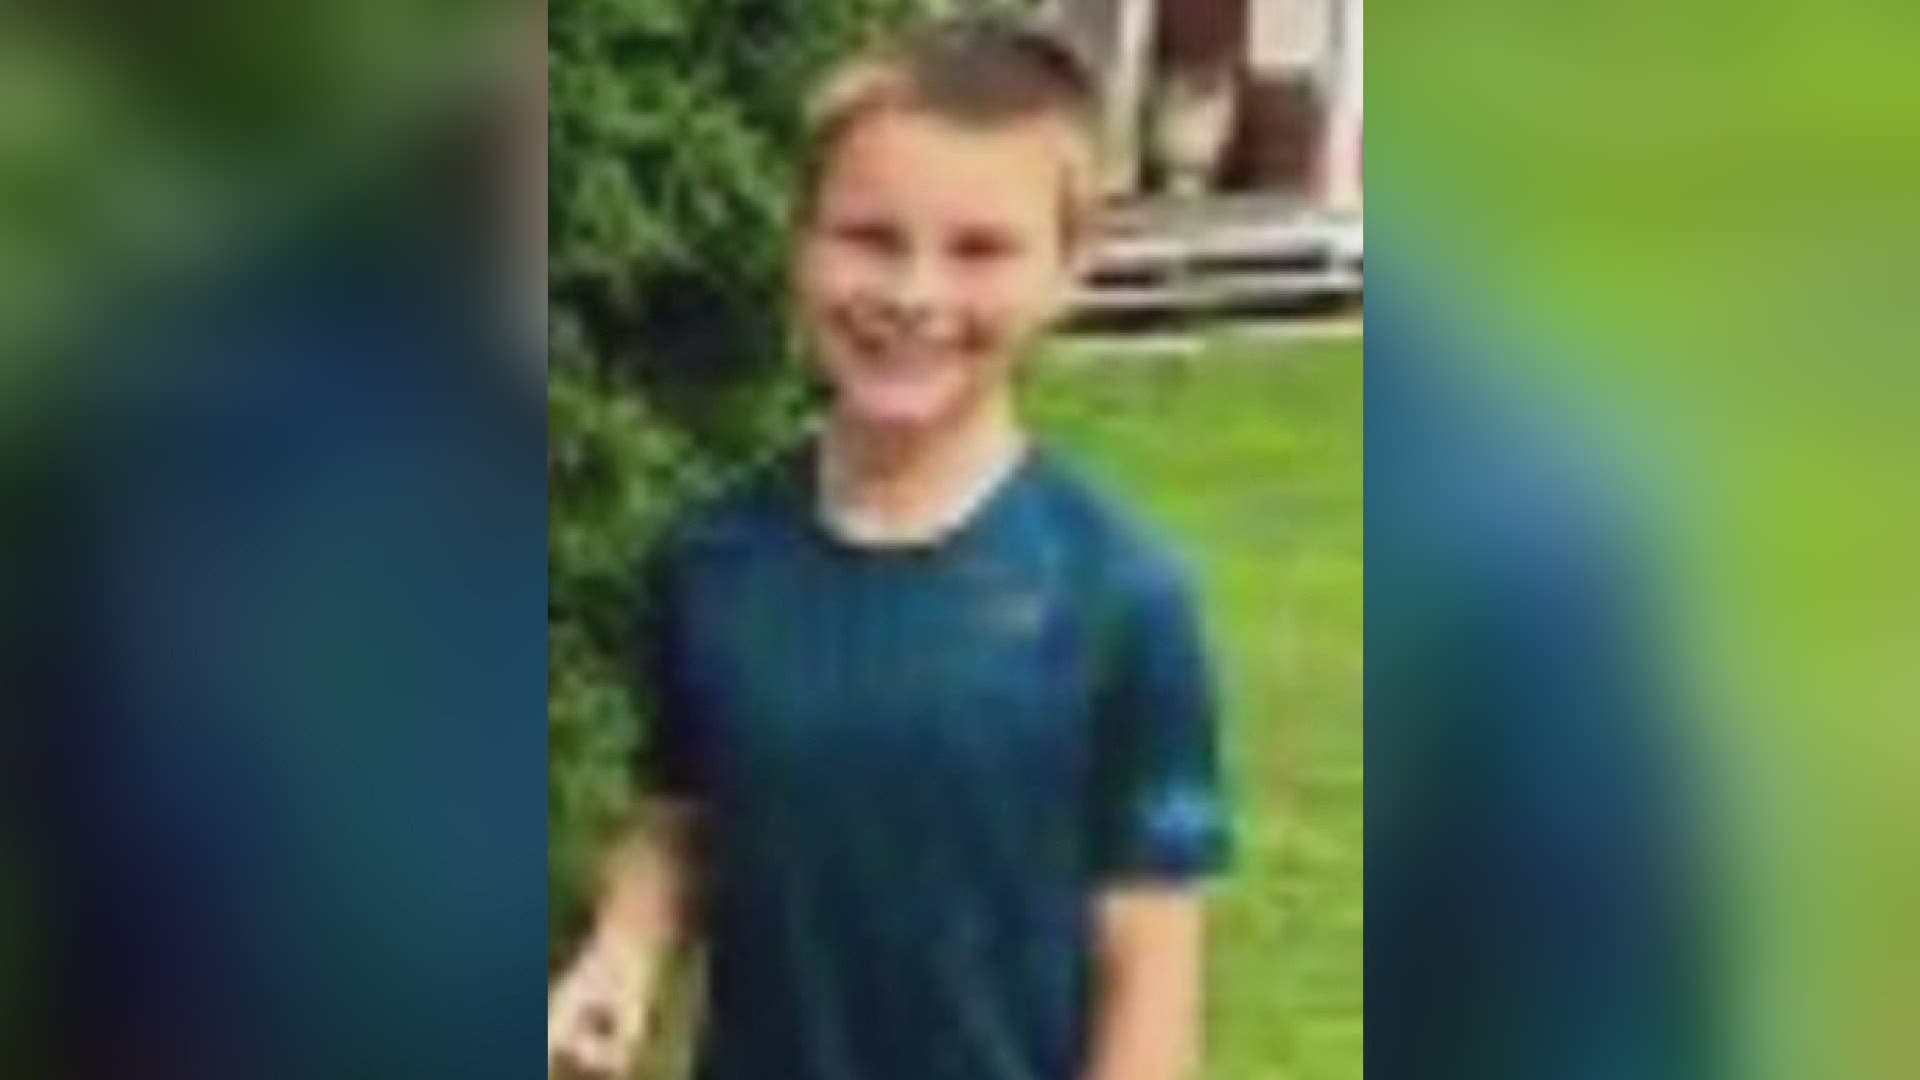 Missing 15-year-old Dustin Merrill of Kingfield has been found.